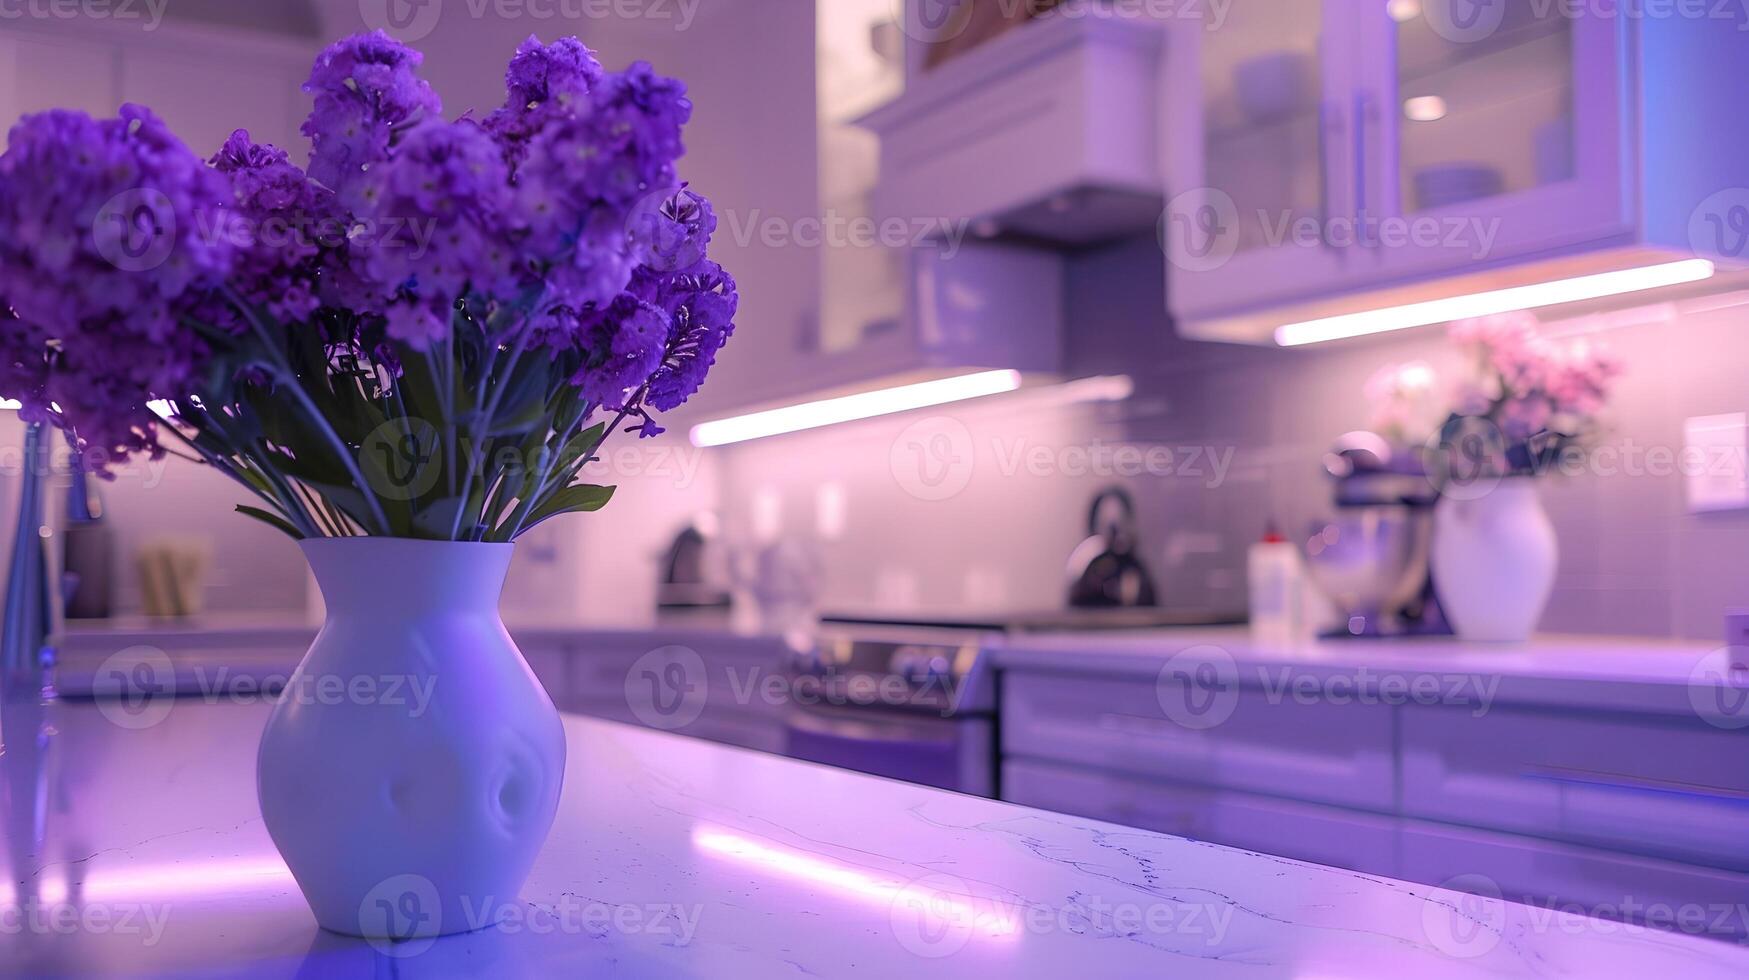 Elegant and Luxurious Purple Flowers Beautifully Displayed on a Modern Kitchen Counter with Warm Lighting and Minimalist Decor photo